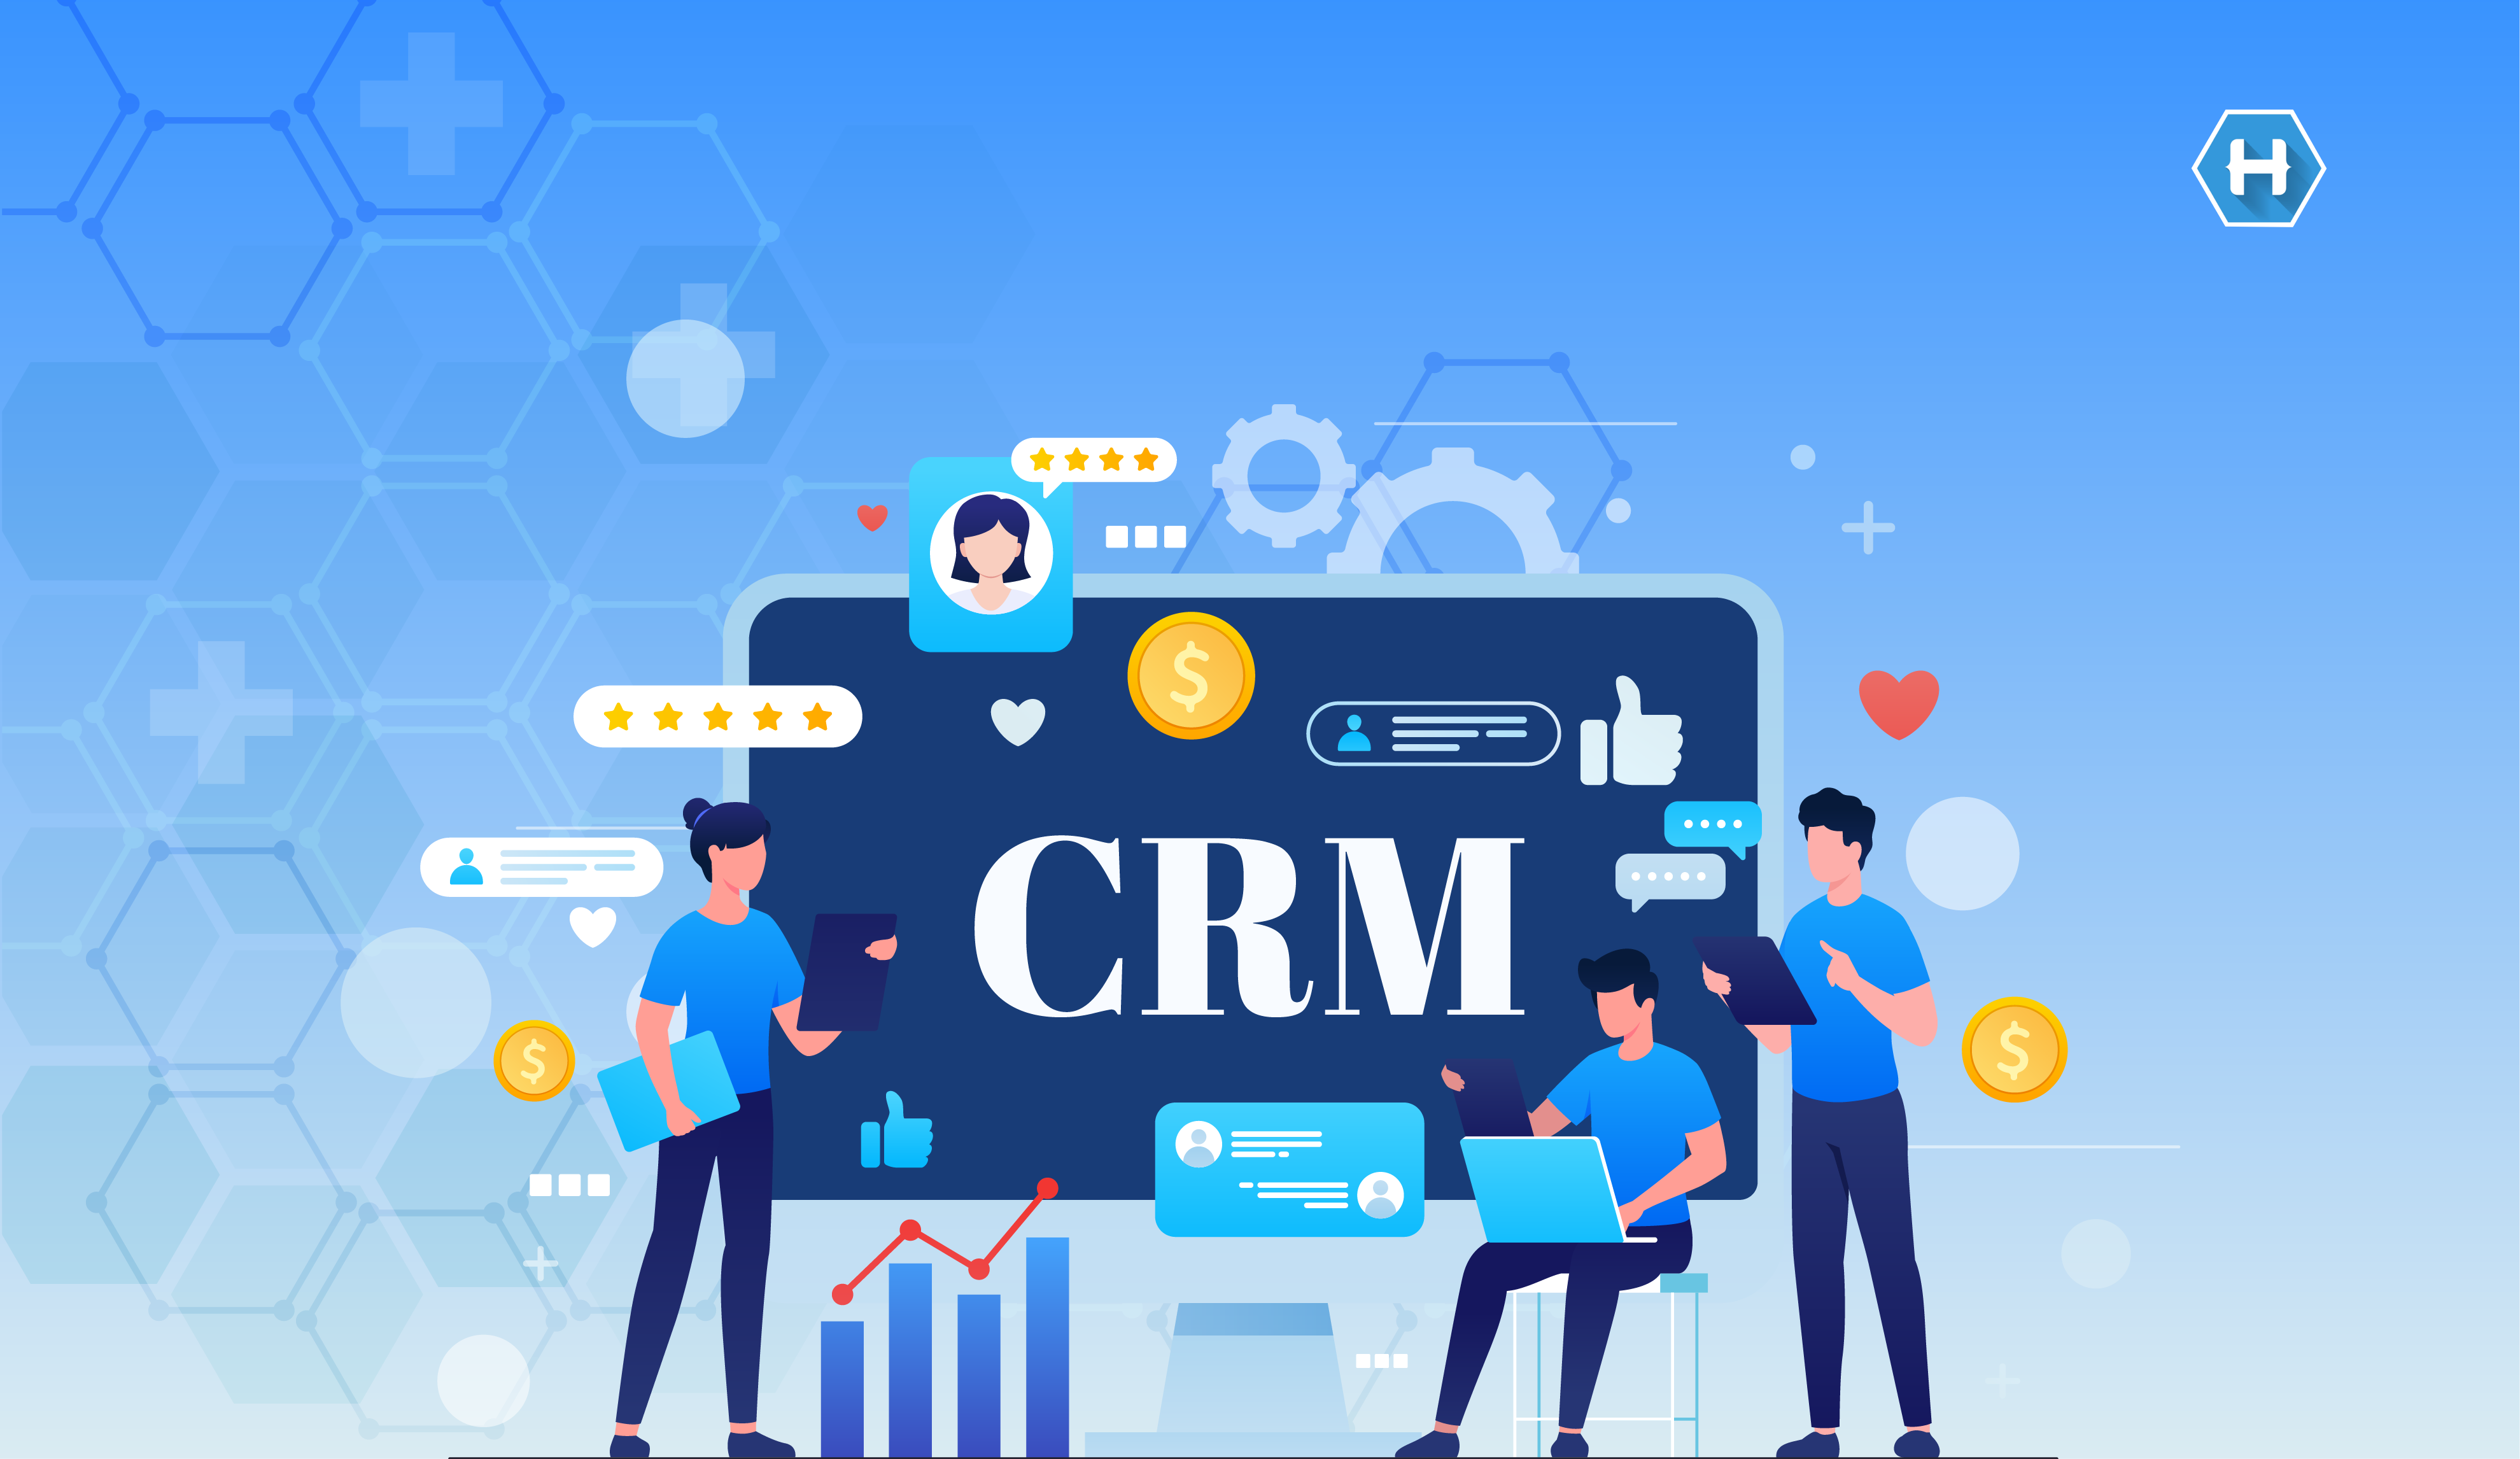 Healthcare CRM Market Report 2022-27: Trends, Size, Industry Growth And Forecast